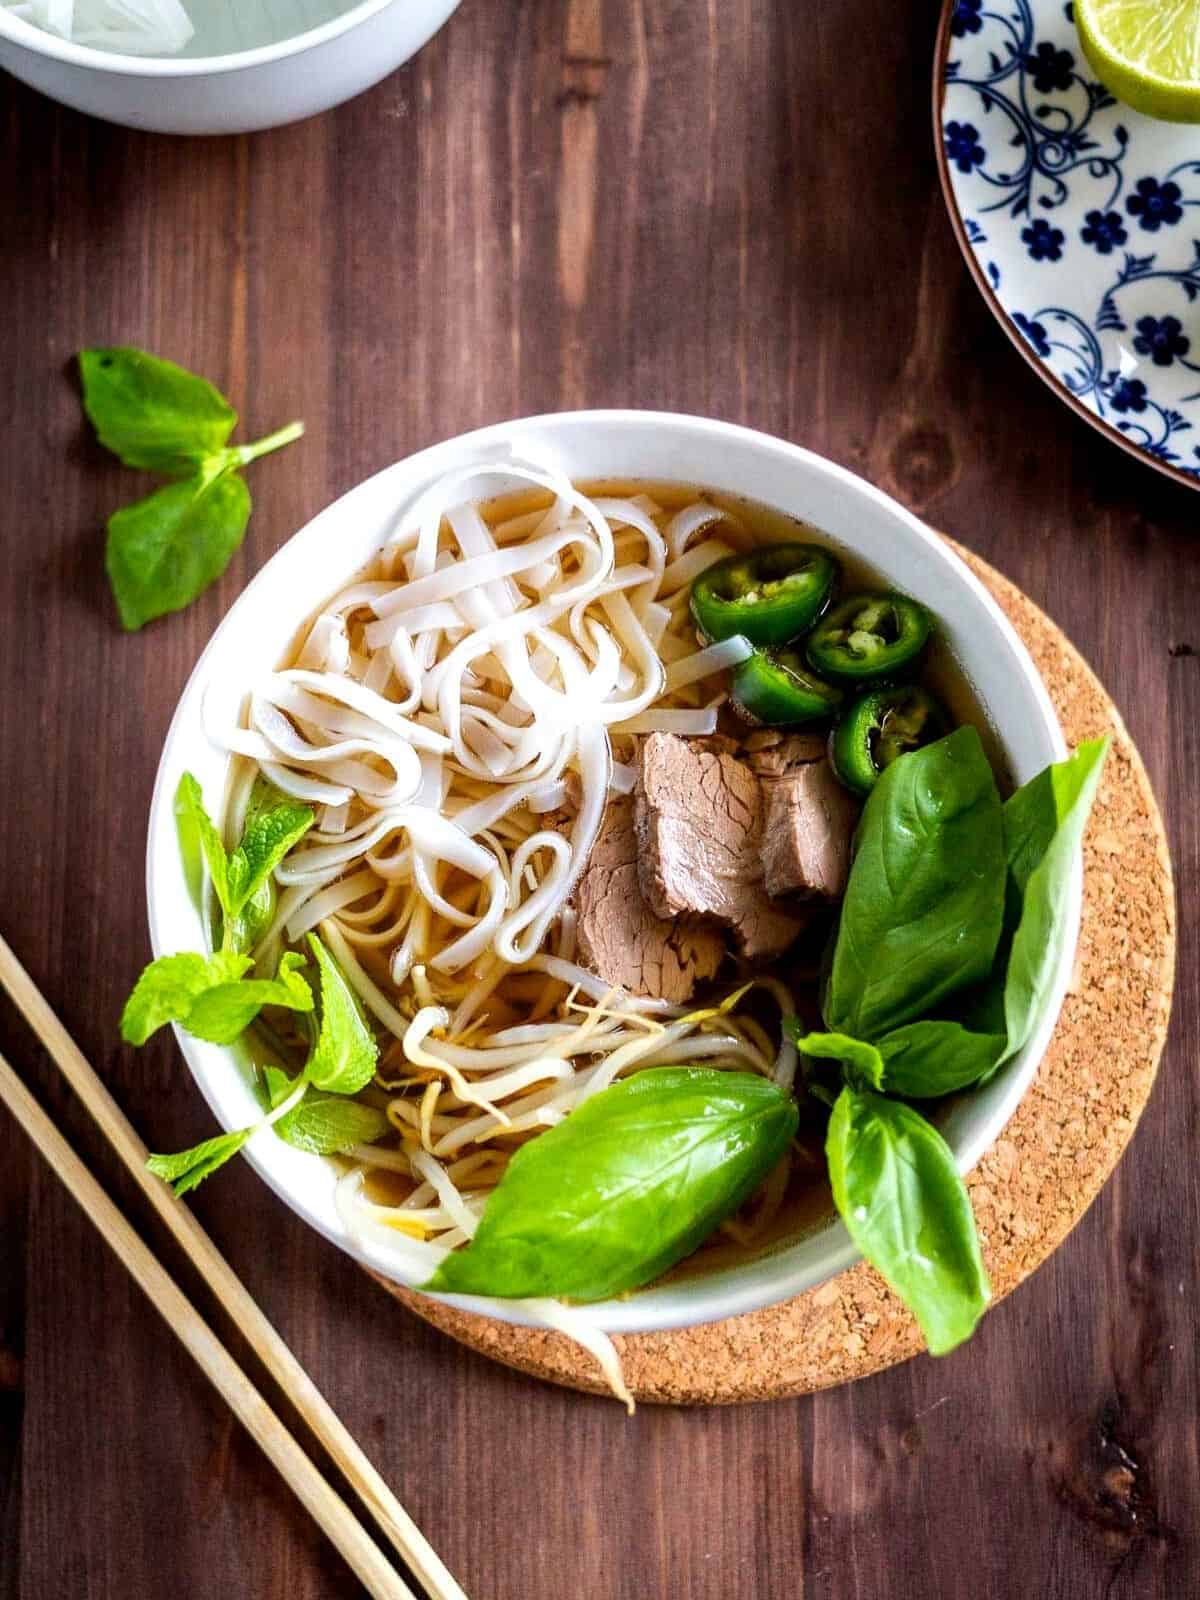 Beef Pho served with broth, noodles and basil in a bowl.